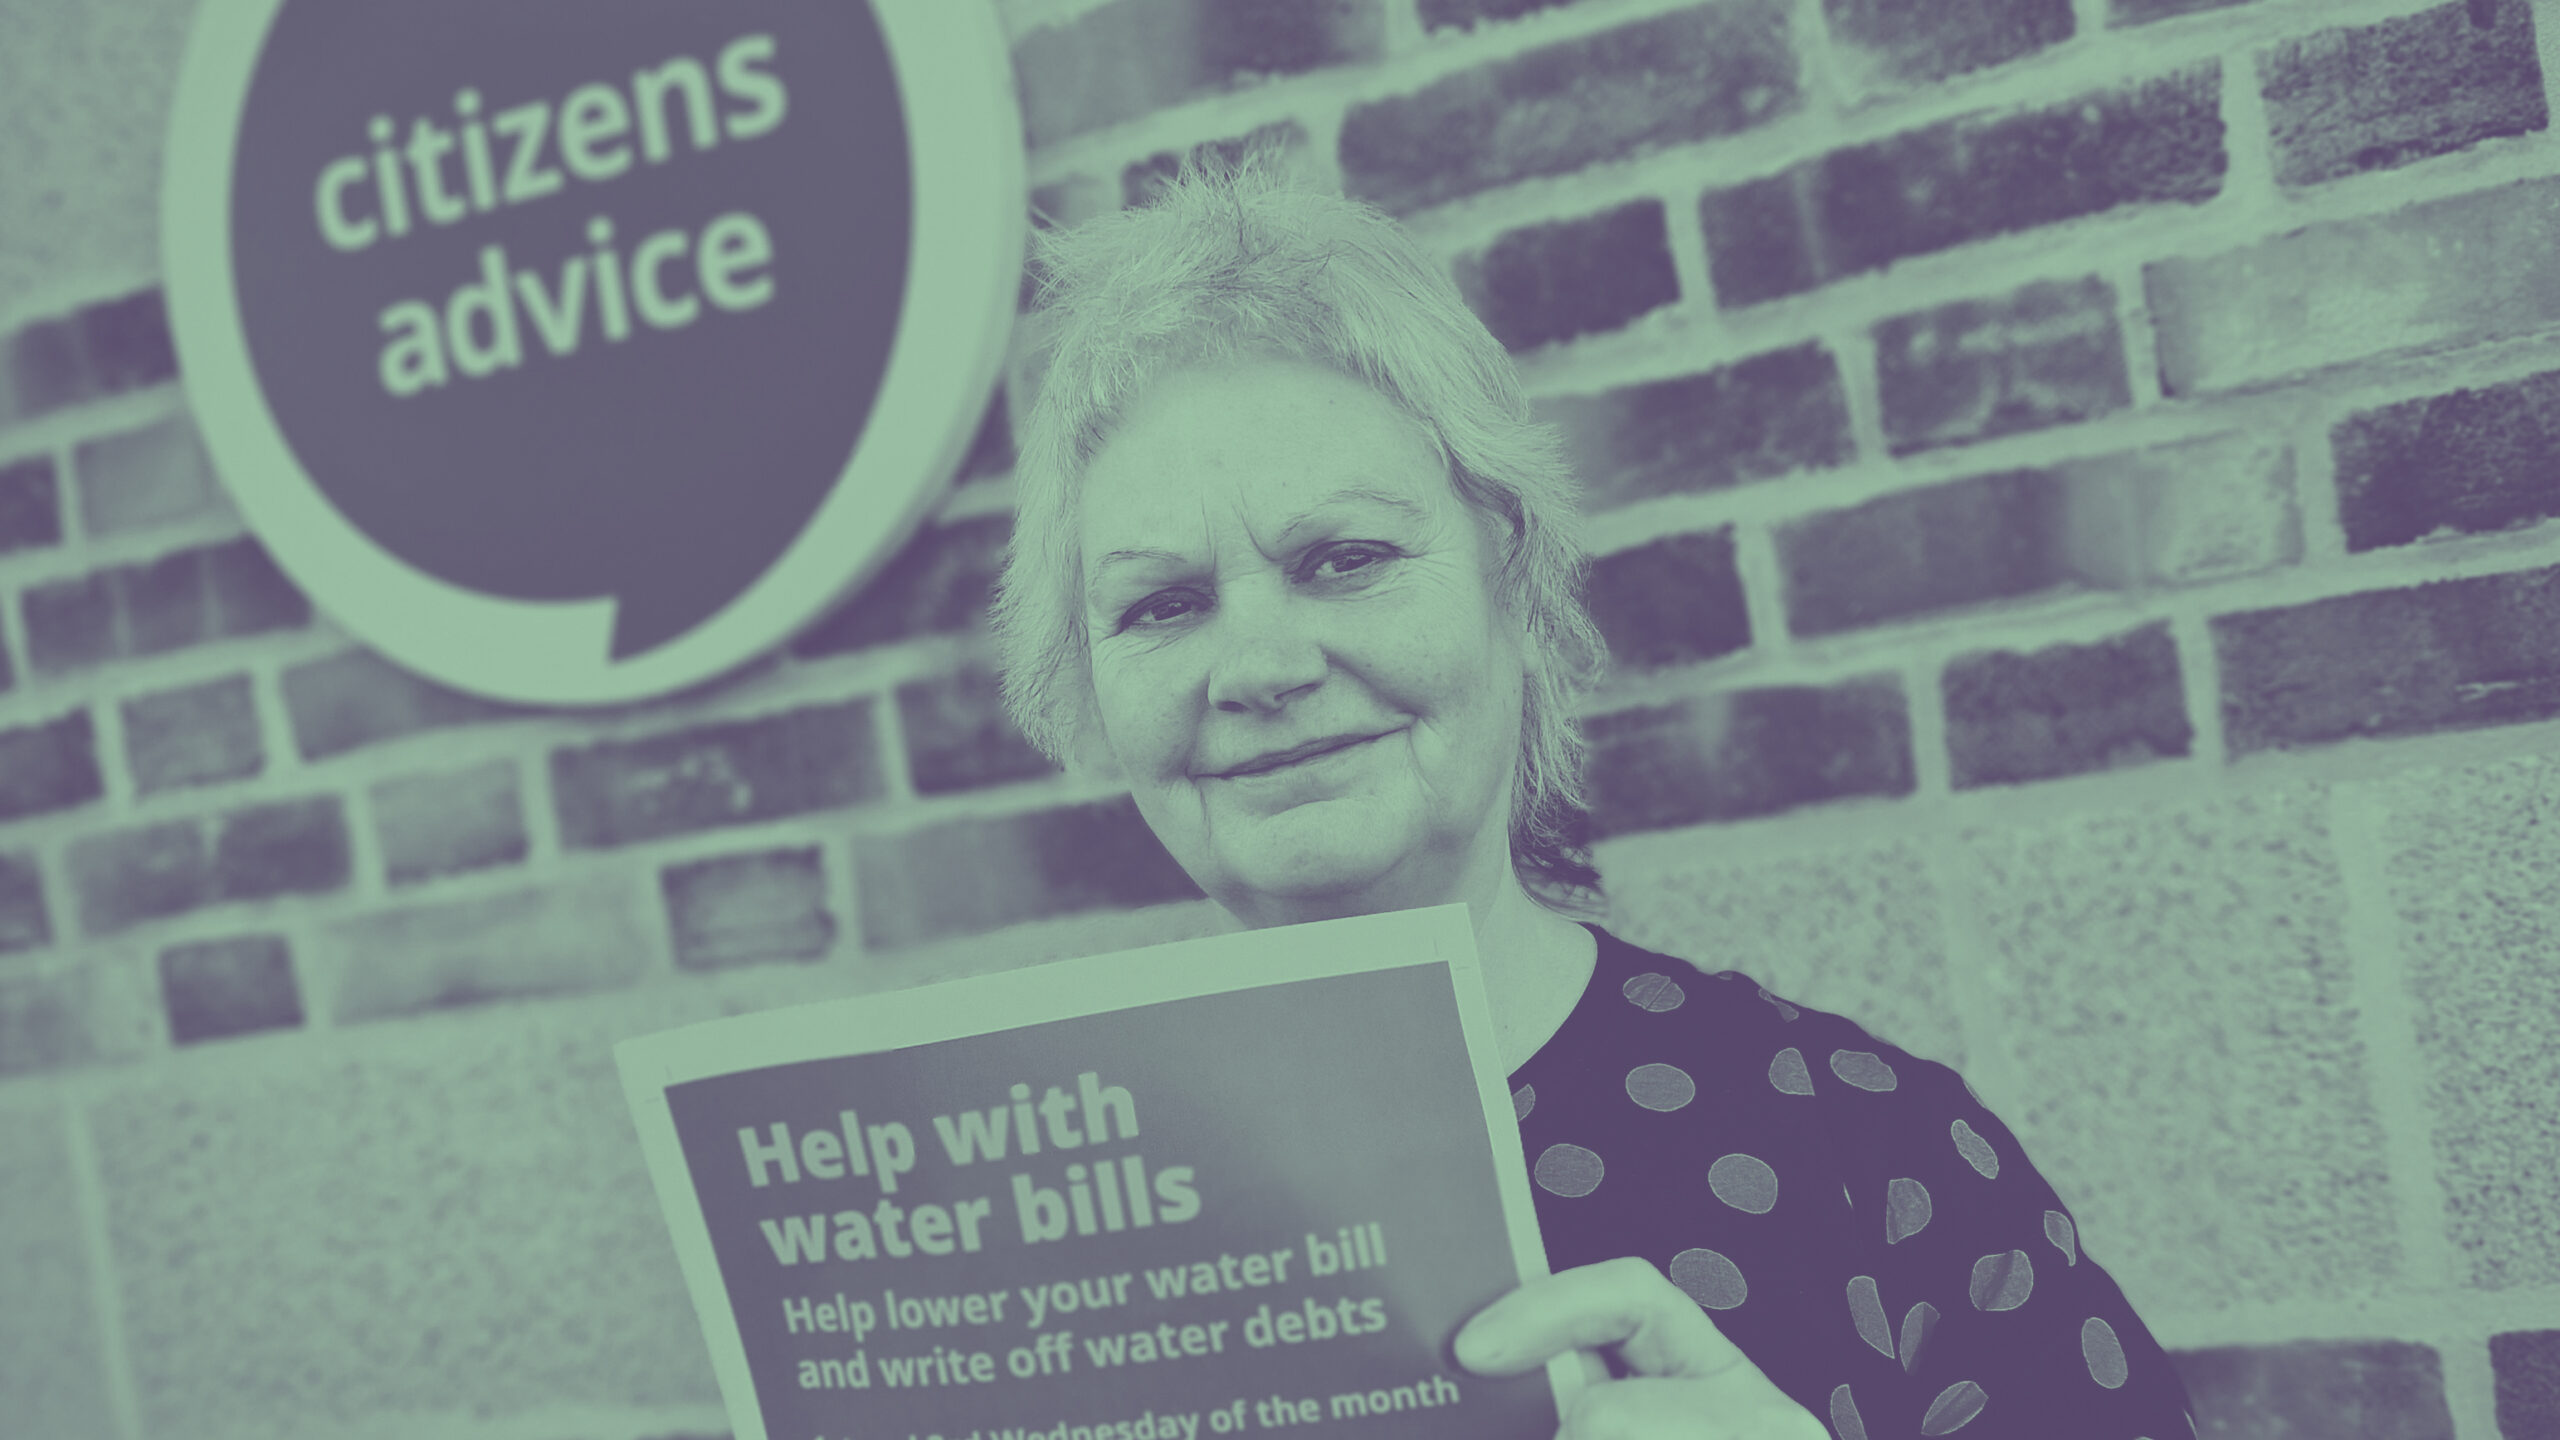 Money expert Yvonne Parks has advice on how to cut water bills and write off arrears